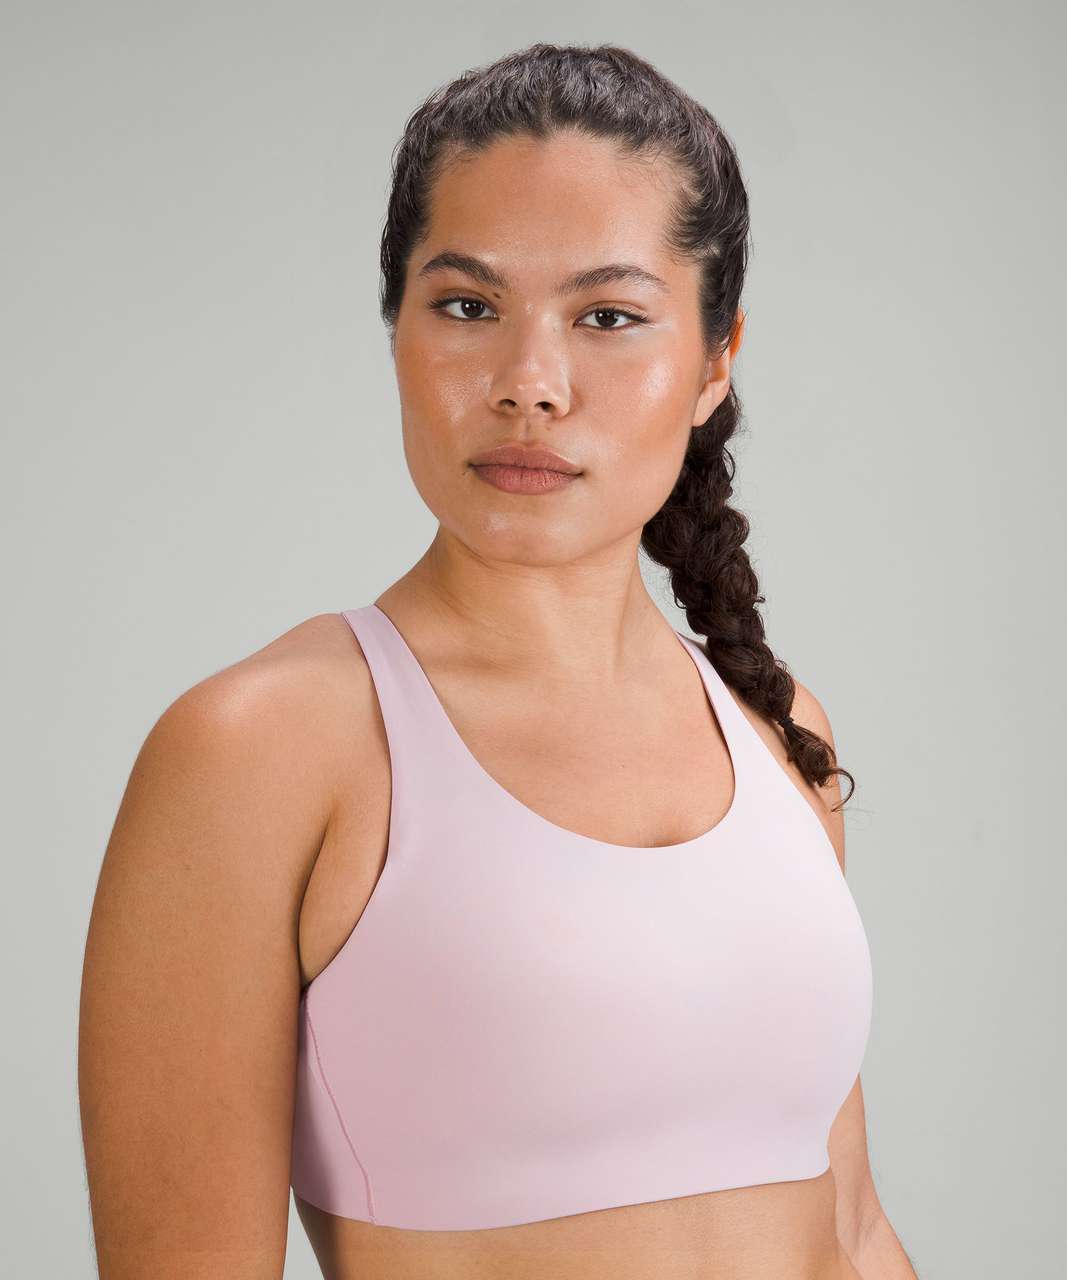 Can You Buy Lululemon Bra Cups? - Playbite